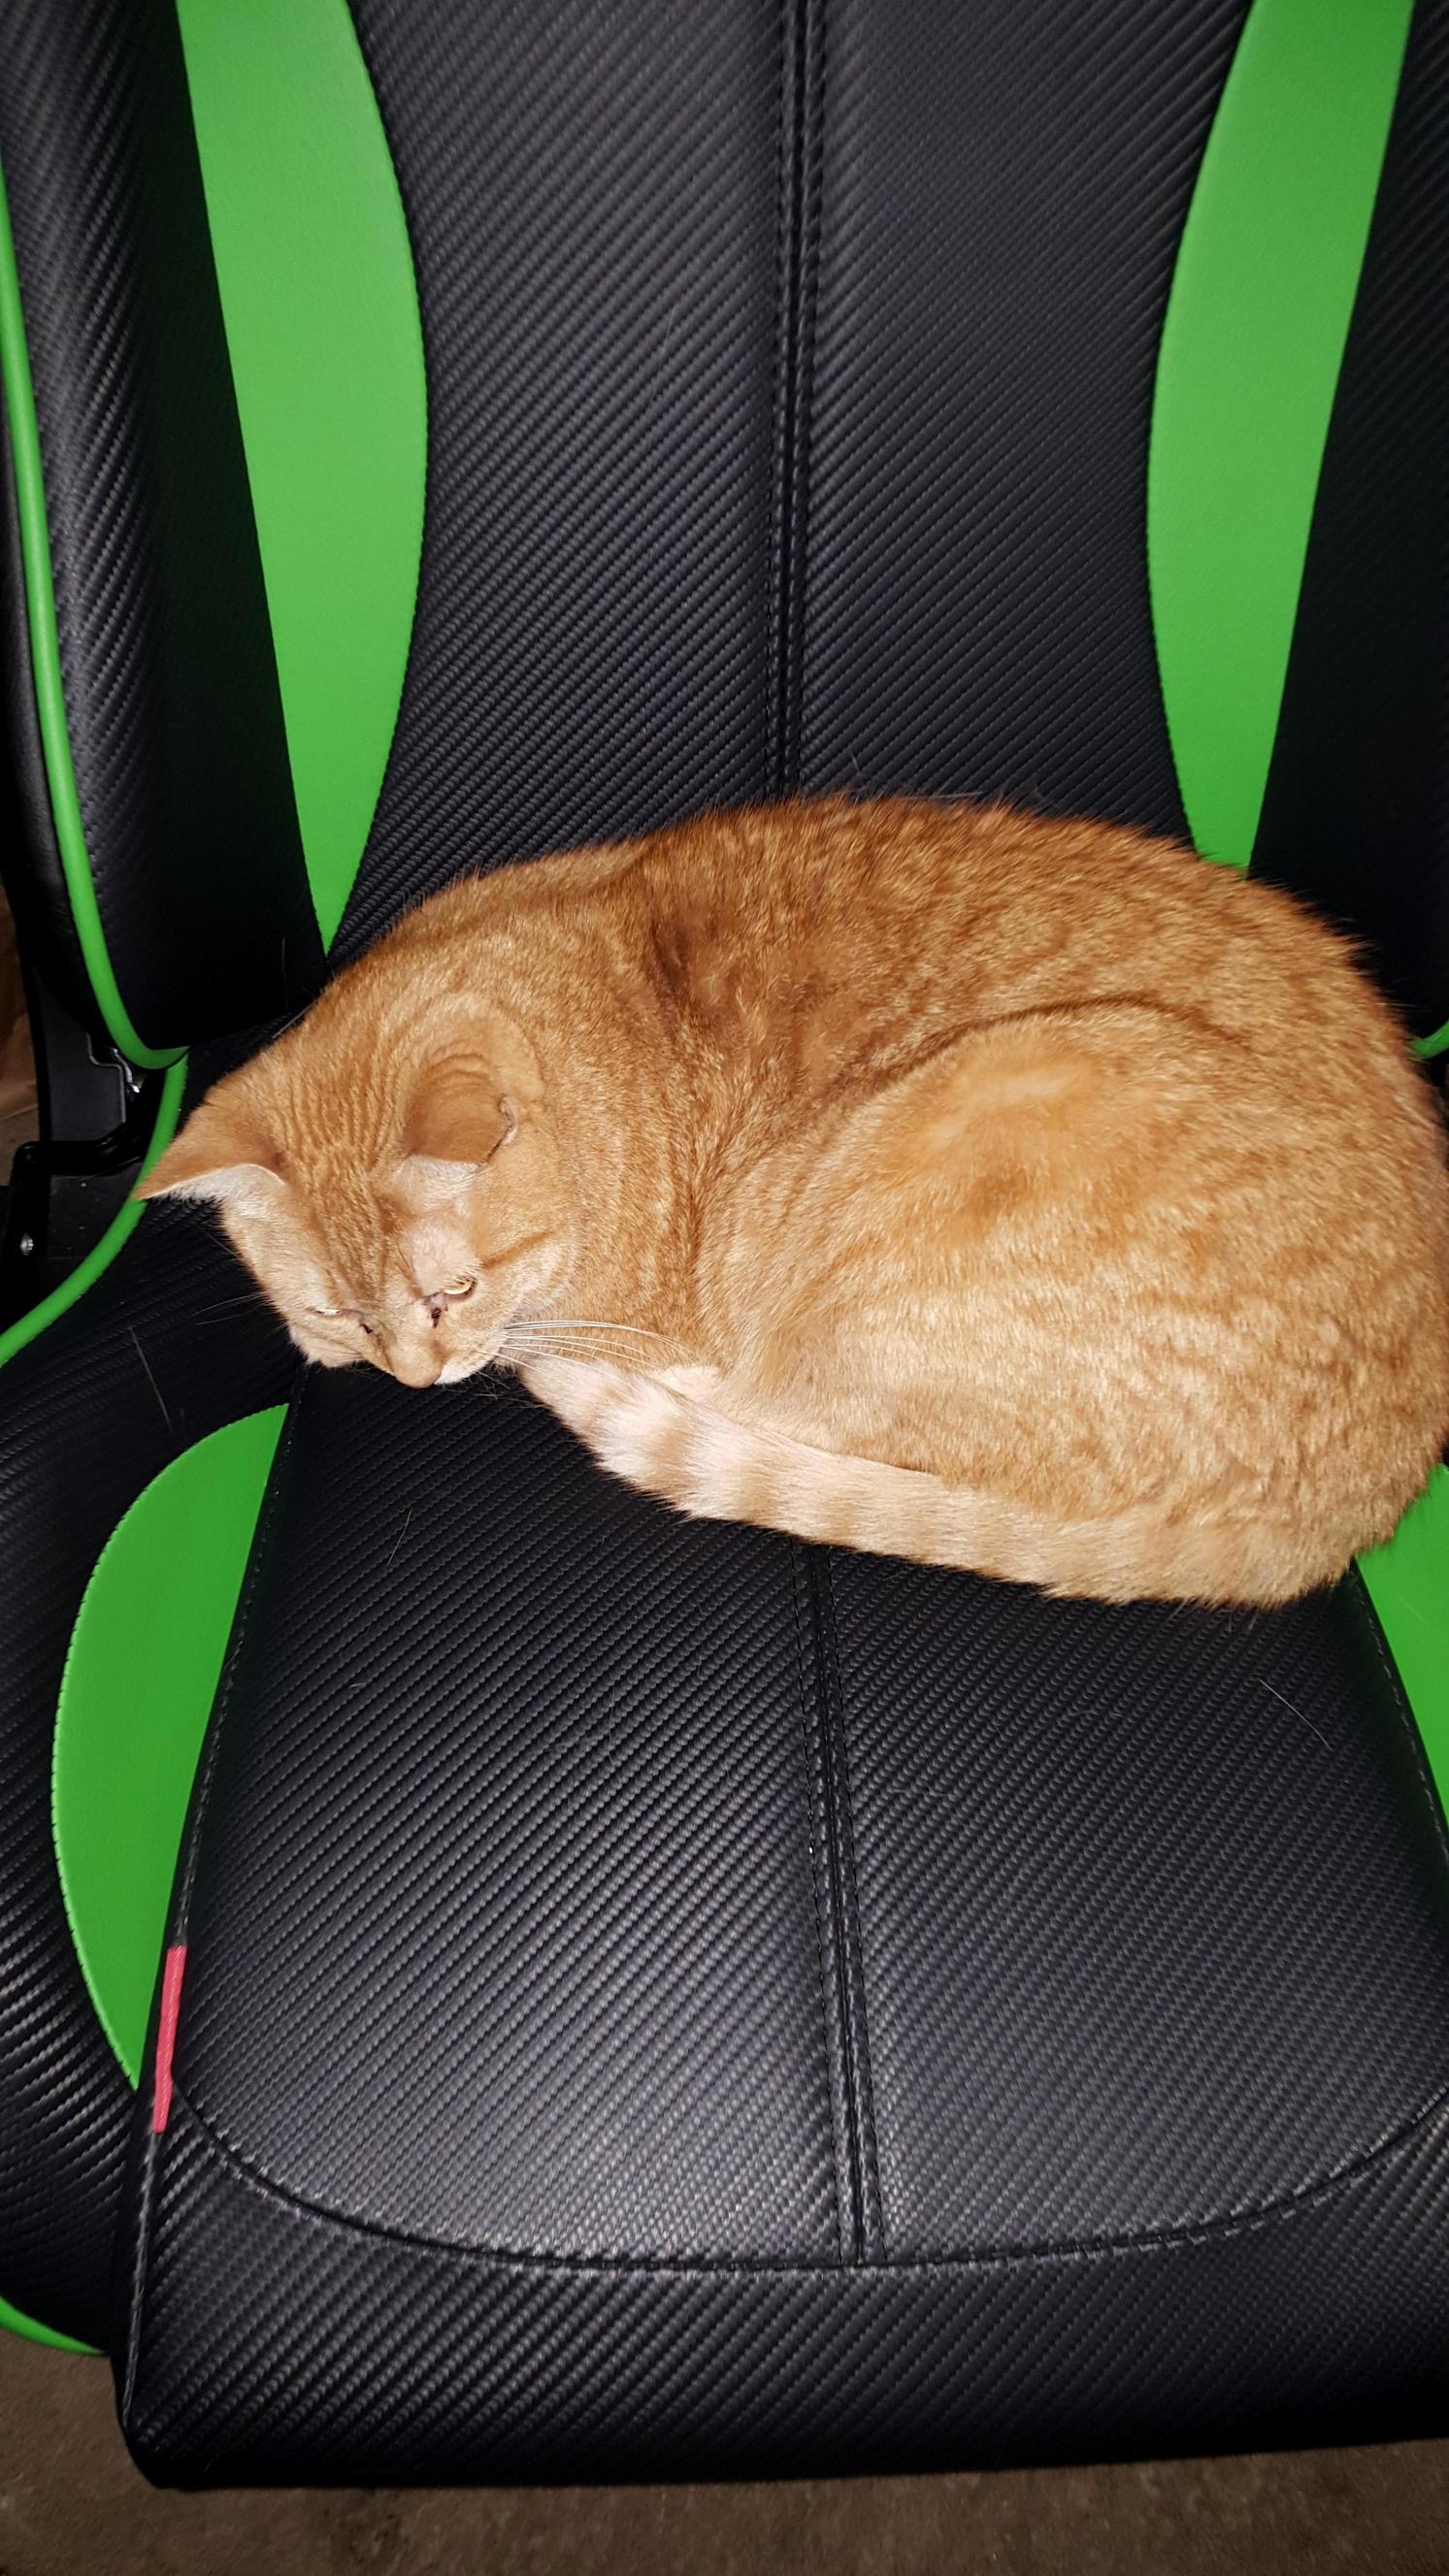 When you call seat back but gamer cat doesnt care about your human rules.